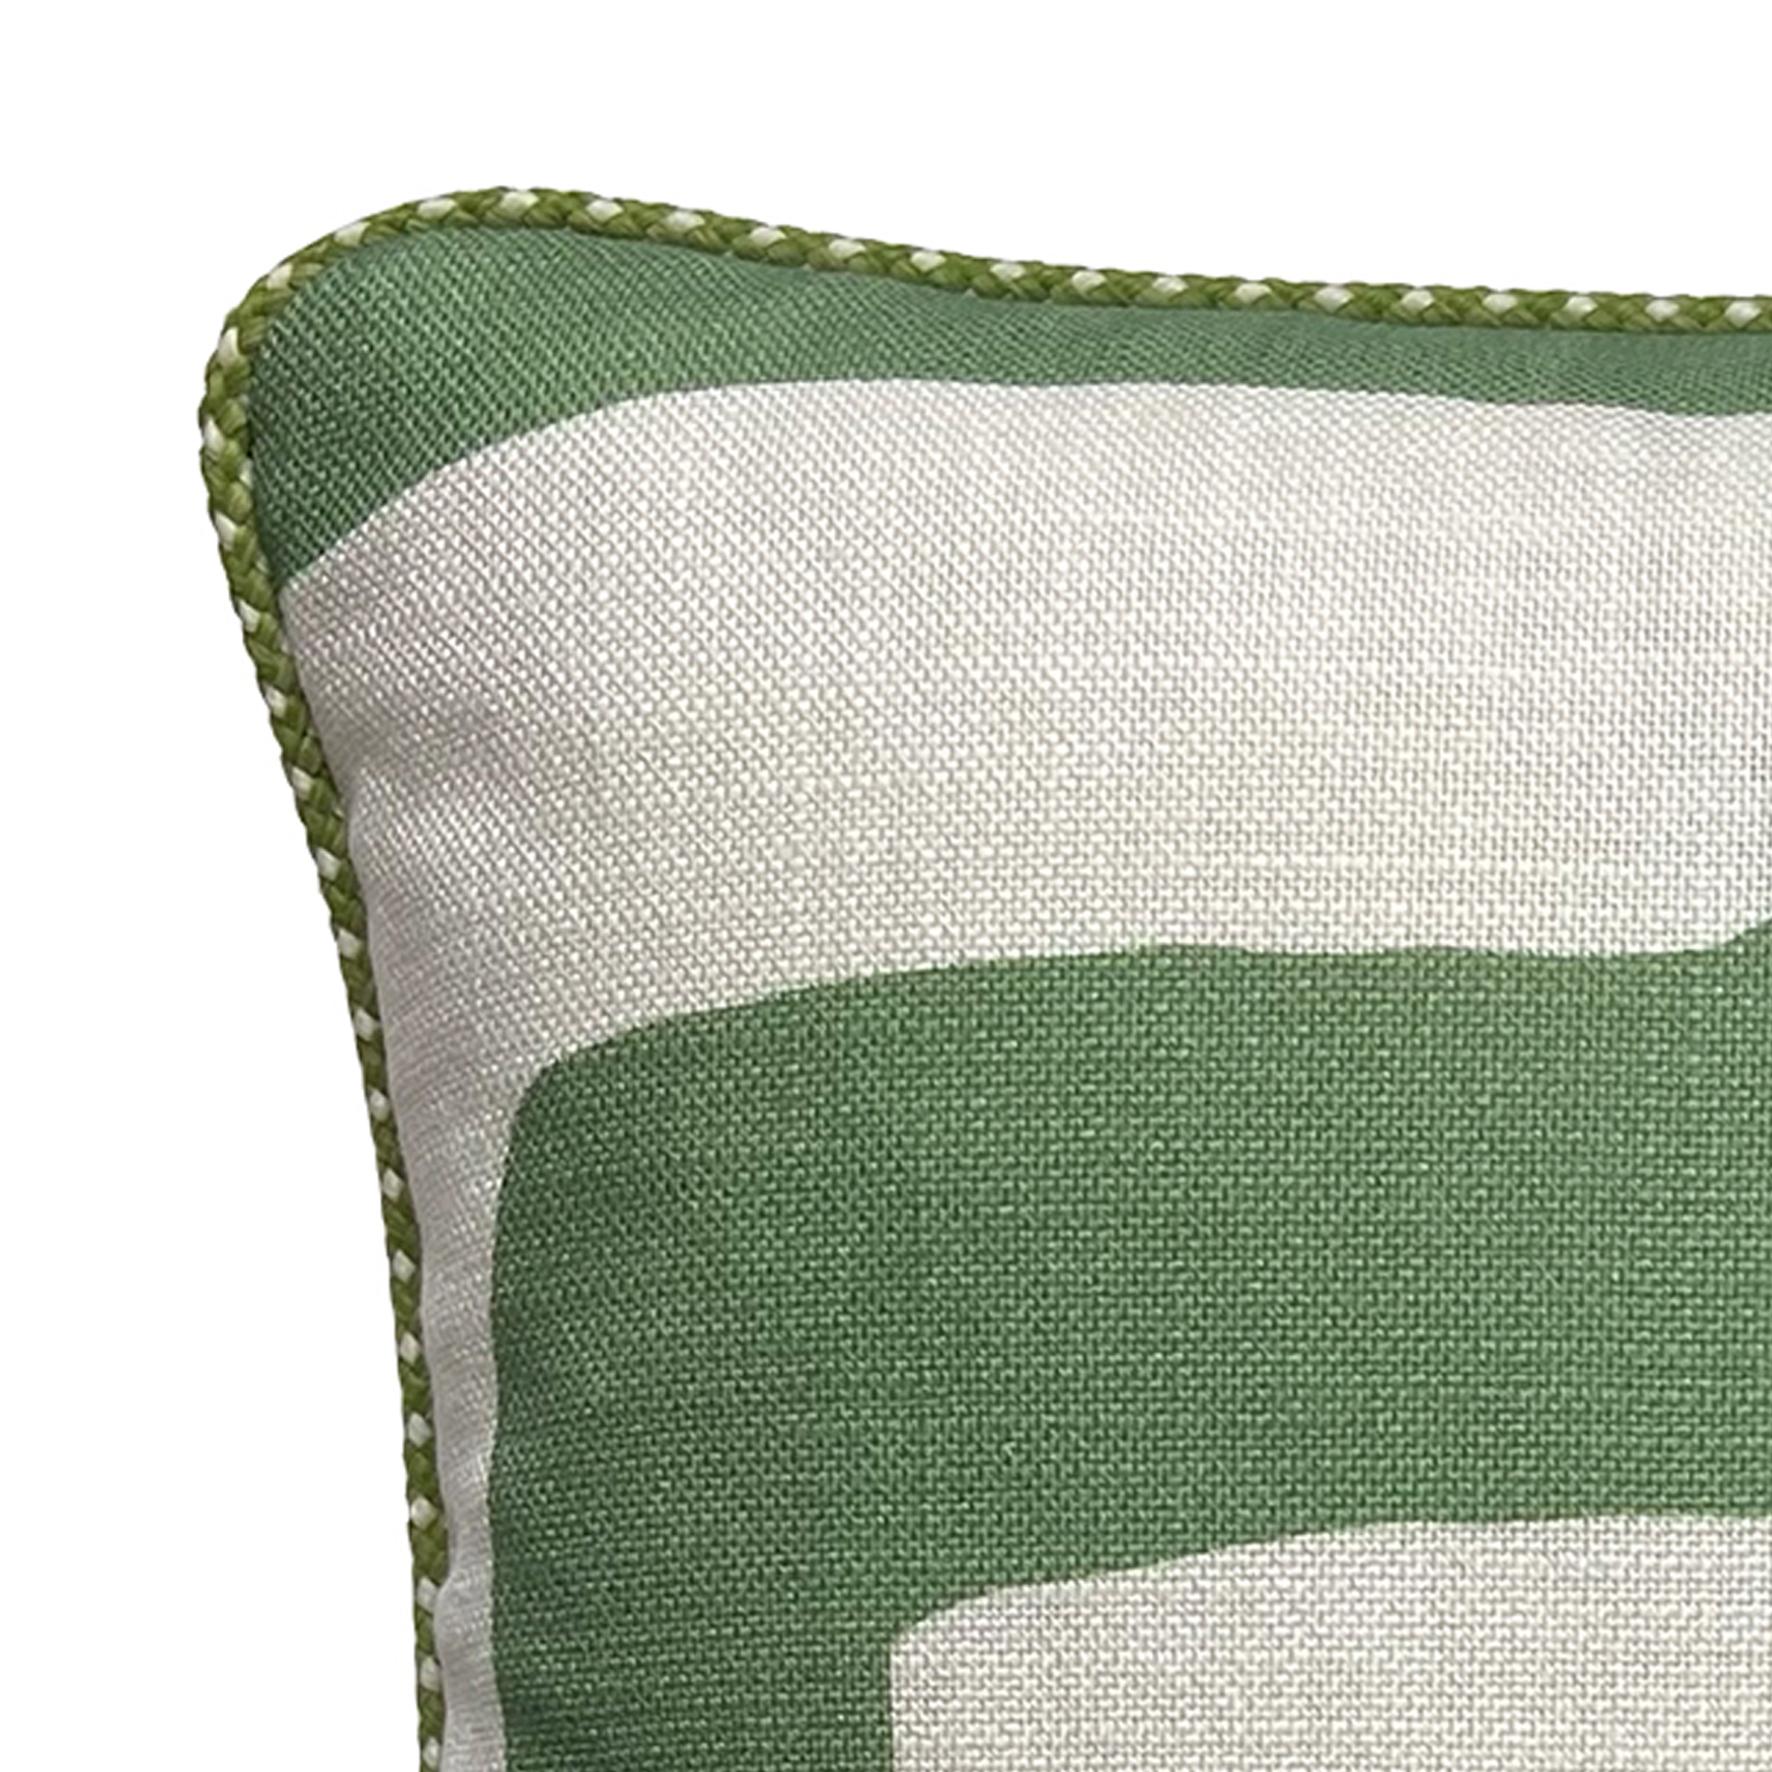 Woven Cora White Kuba Linen Piped Cushion For Sale